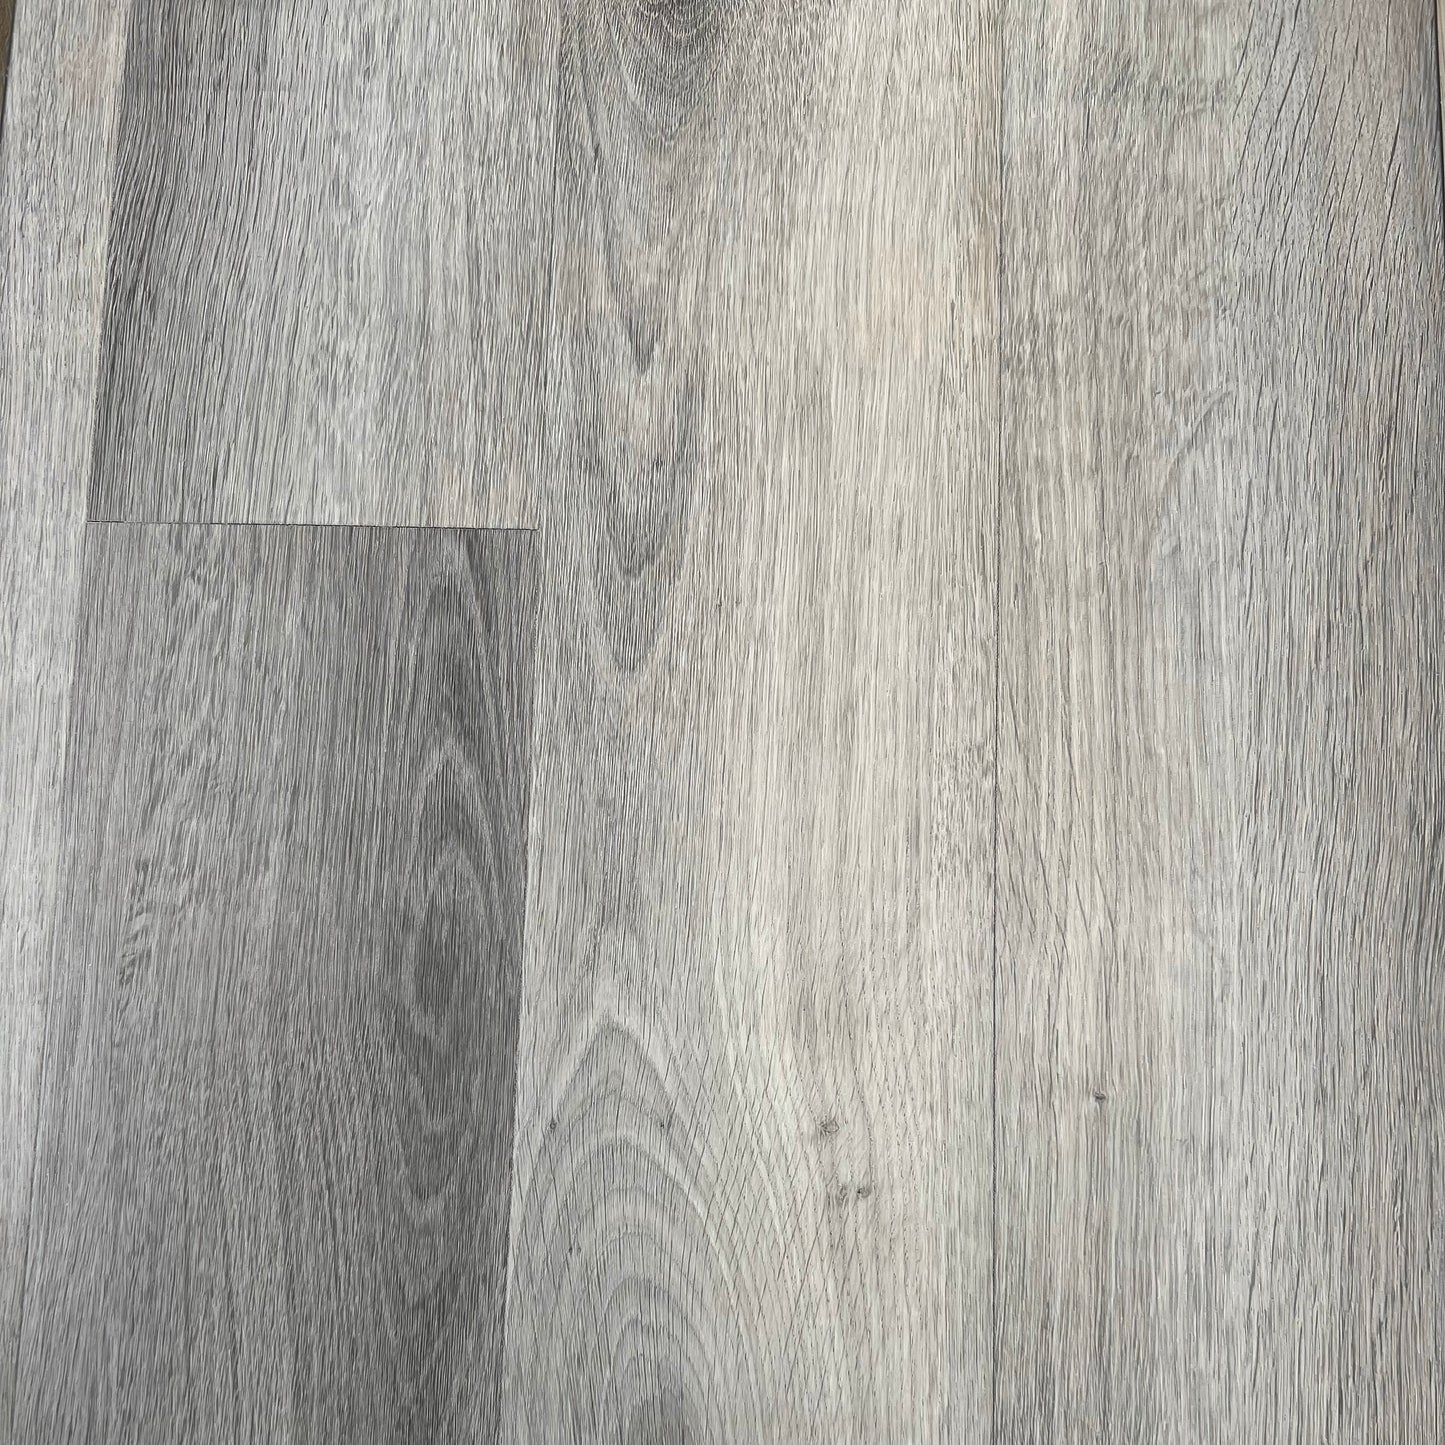 Invictus plank highland Oak Frosted 5mm £37.10 per sq mt